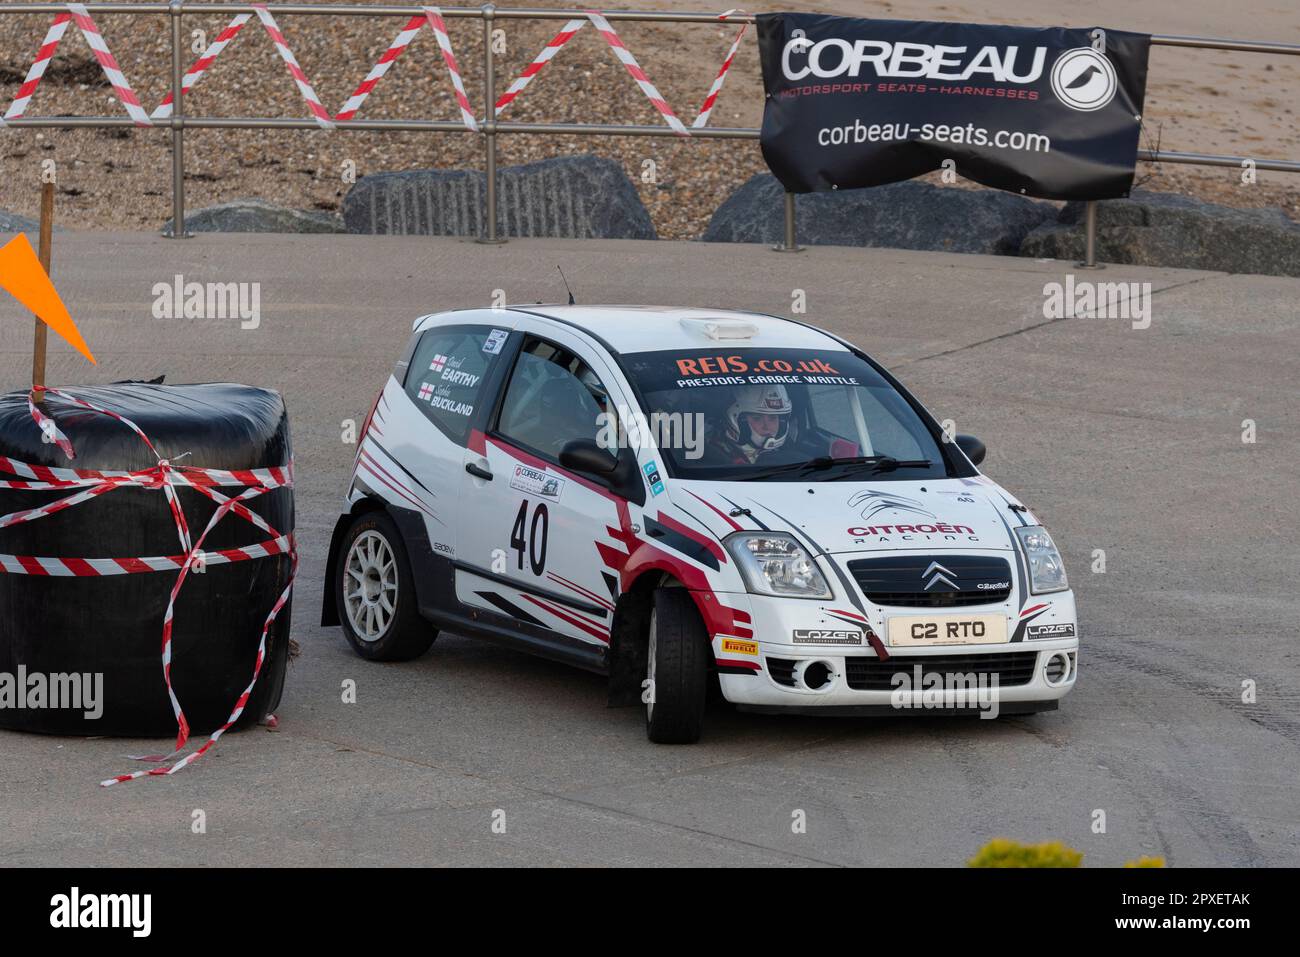 David Earthy racing a Citroen C2 R2 Max competing in the Corbeau Seats rally on the seafront at Clacton, Essex, UK. Co driver Sophie Buckland Stock Photo